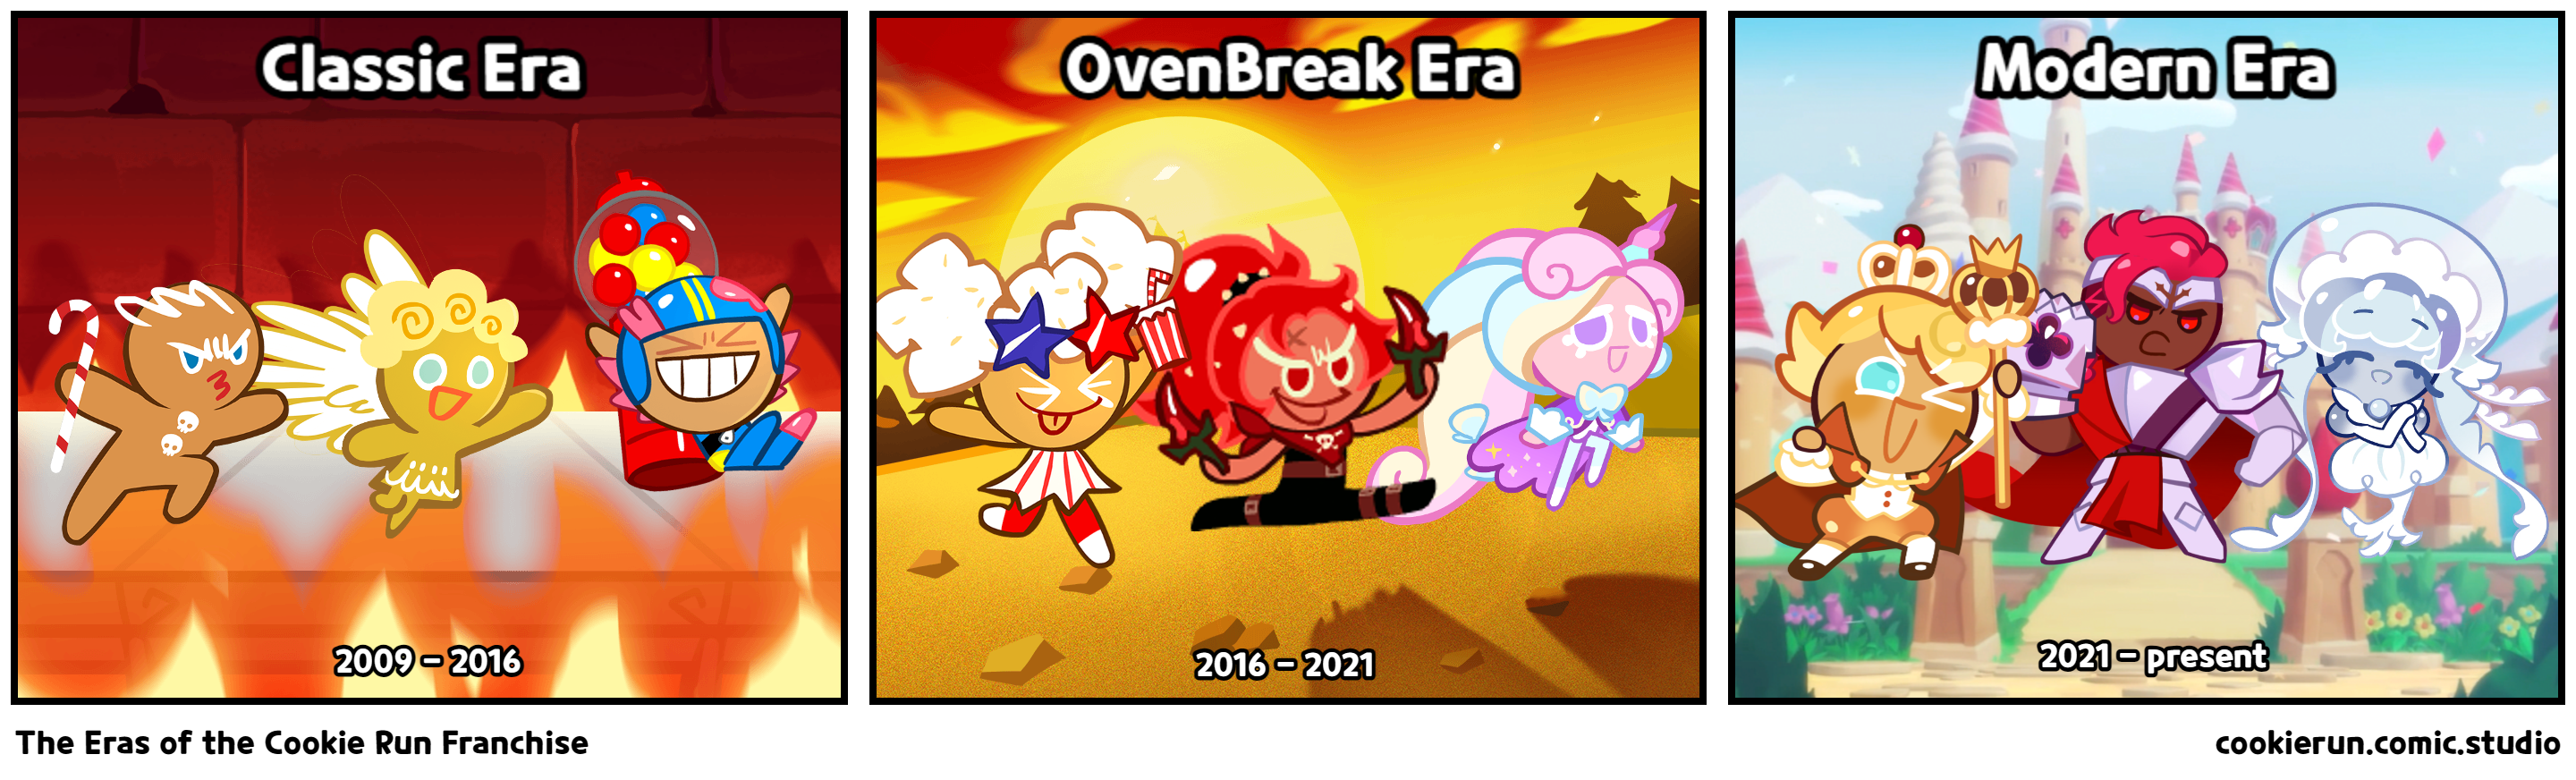 The Eras of the Cookie Run Franchise